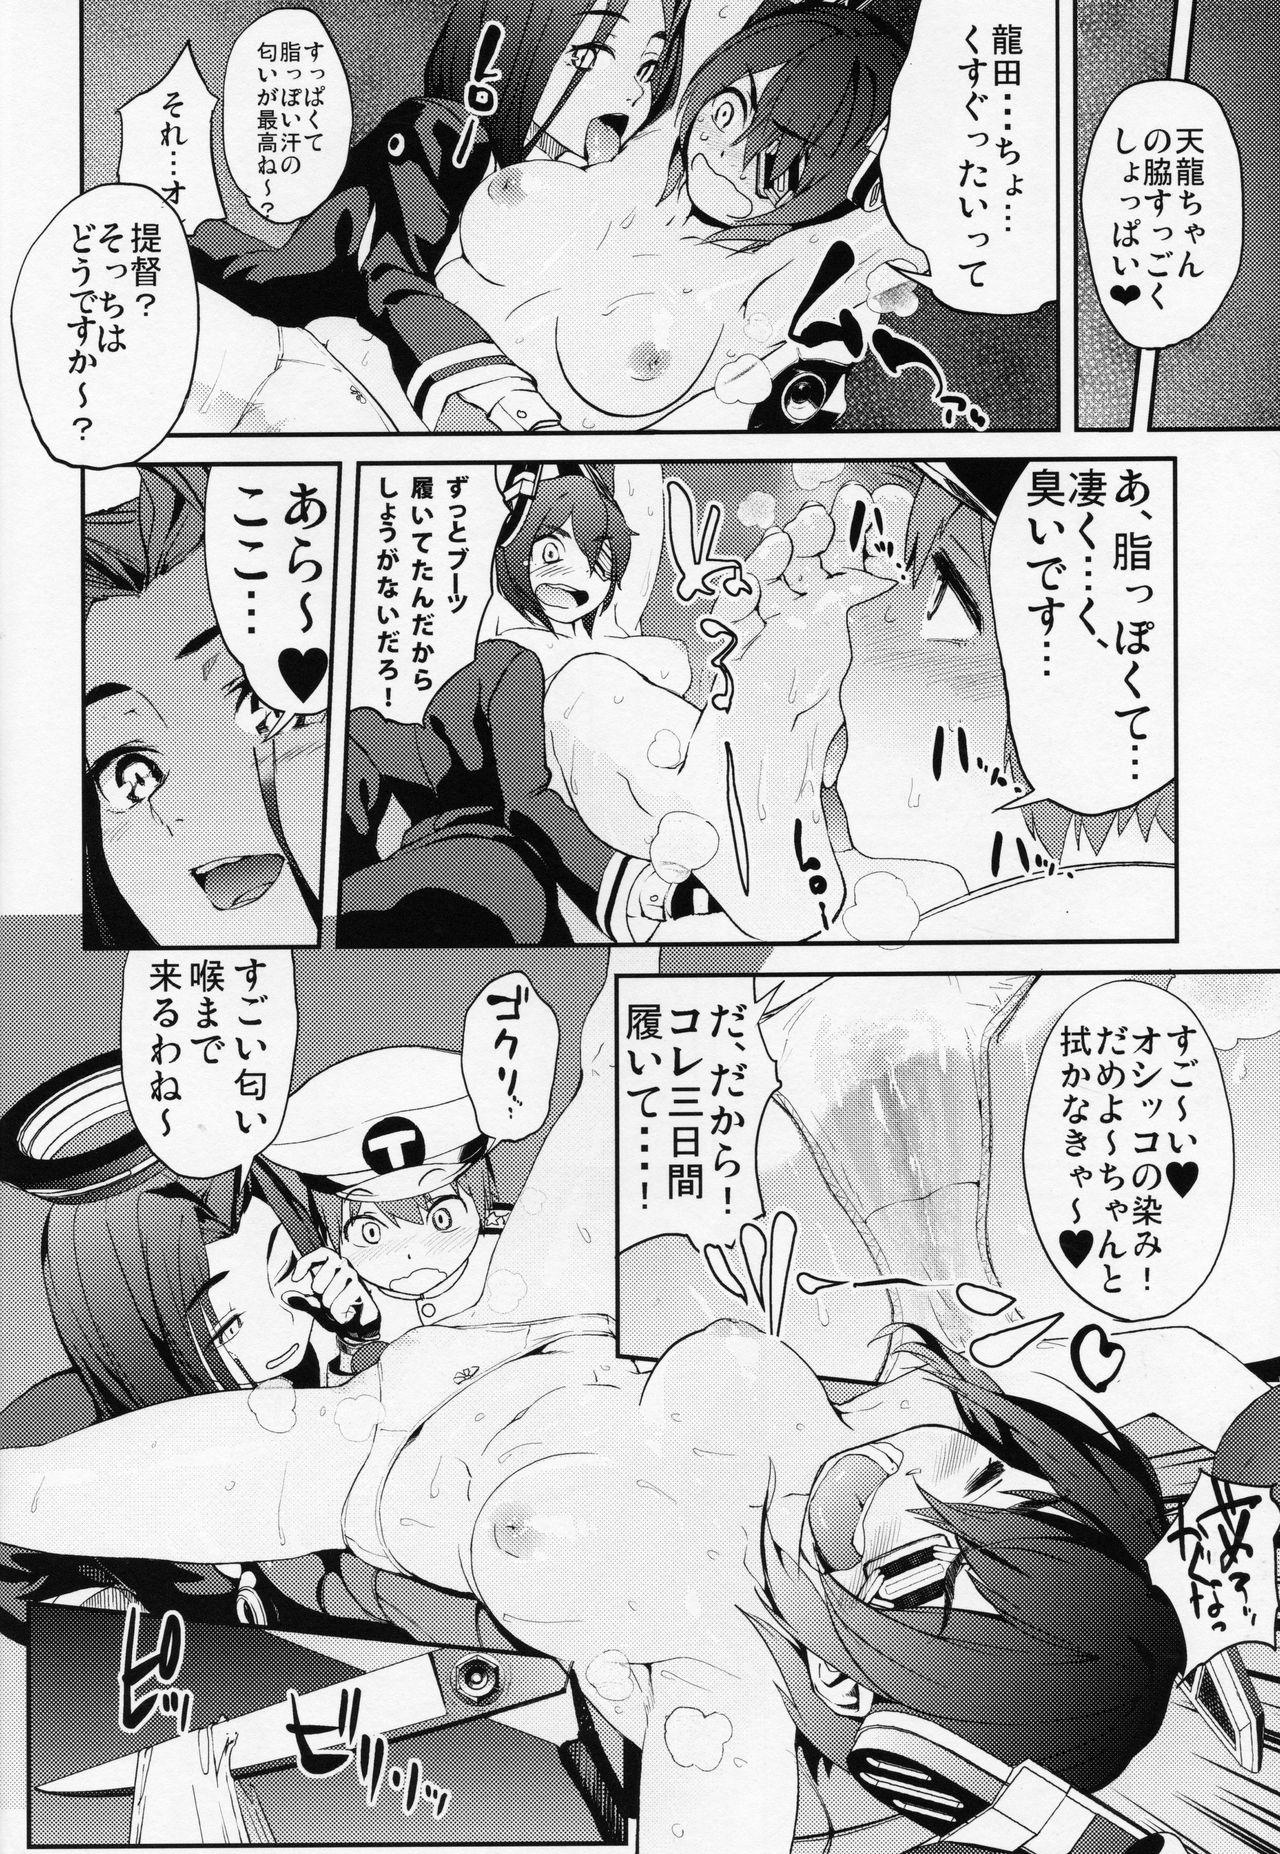 Costume Operation TTT - Kantai collection Transex - Page 11